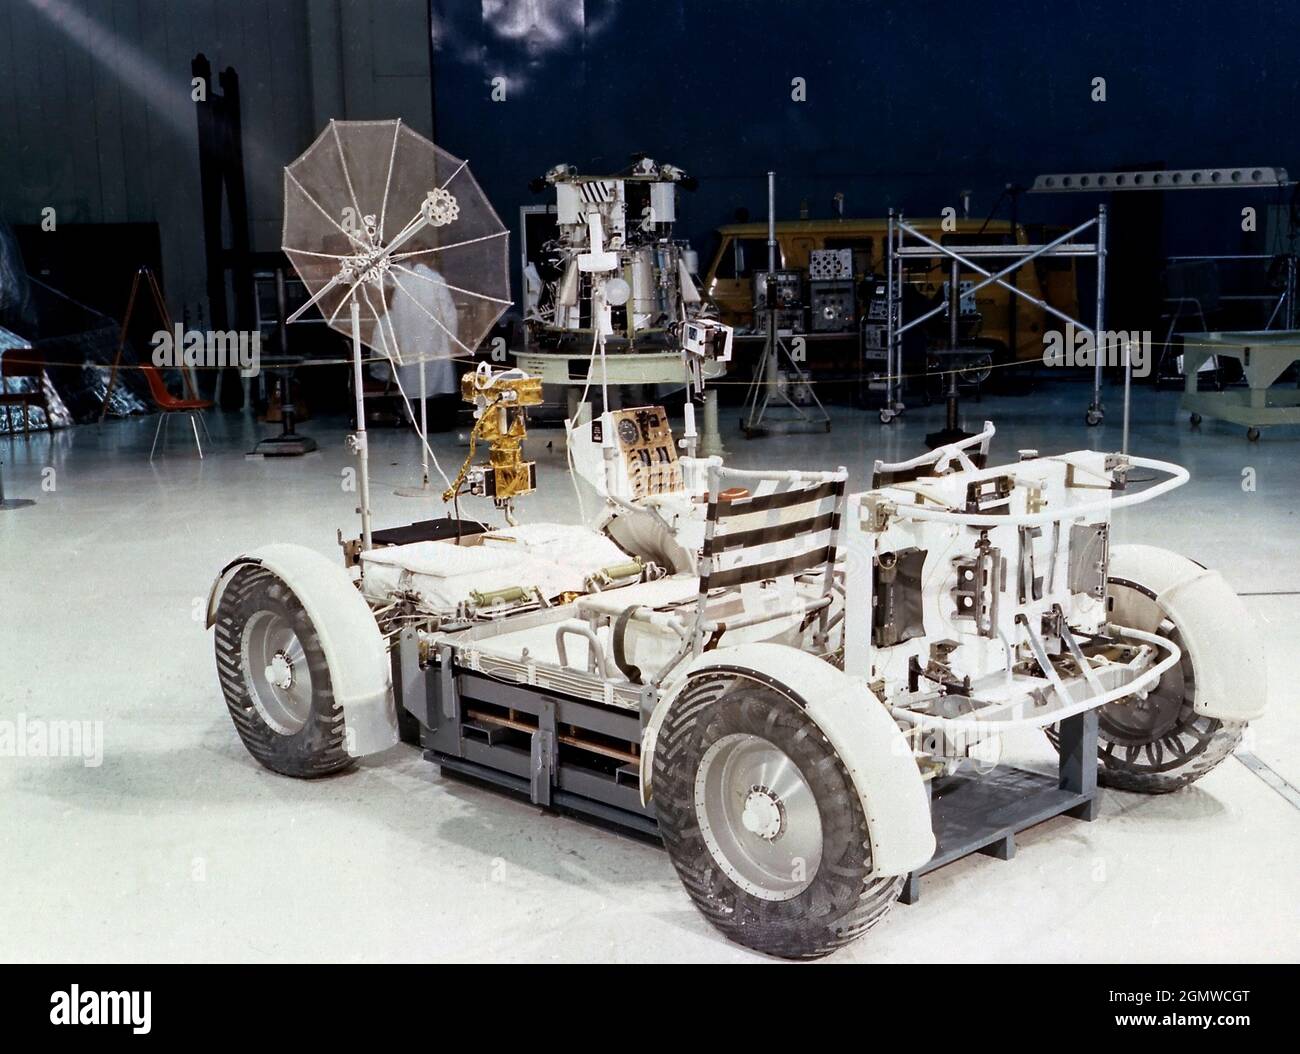 The Lunar Roving Vehicle (LRV) was designed to transport astronauts and materials on the Moon. It was a collapsible open-space vehicle about 10 feet long with large mesh wheels, anterna, appendages, tool caddies, and cameras. Powered by two 36-volt batteries, it has four 1/4-hp drive motors, one for each wheel. The vehicle was designed to travel in forward or reverse, negotiate obstacles about 1 foot high, cross crevasses about 2 feet wide, and climb or descend moderate slopes. Its speed limit was about 9 miles (14 kilometers) per hour. An LRV was used on each of the last three Apollo missions Stock Photo